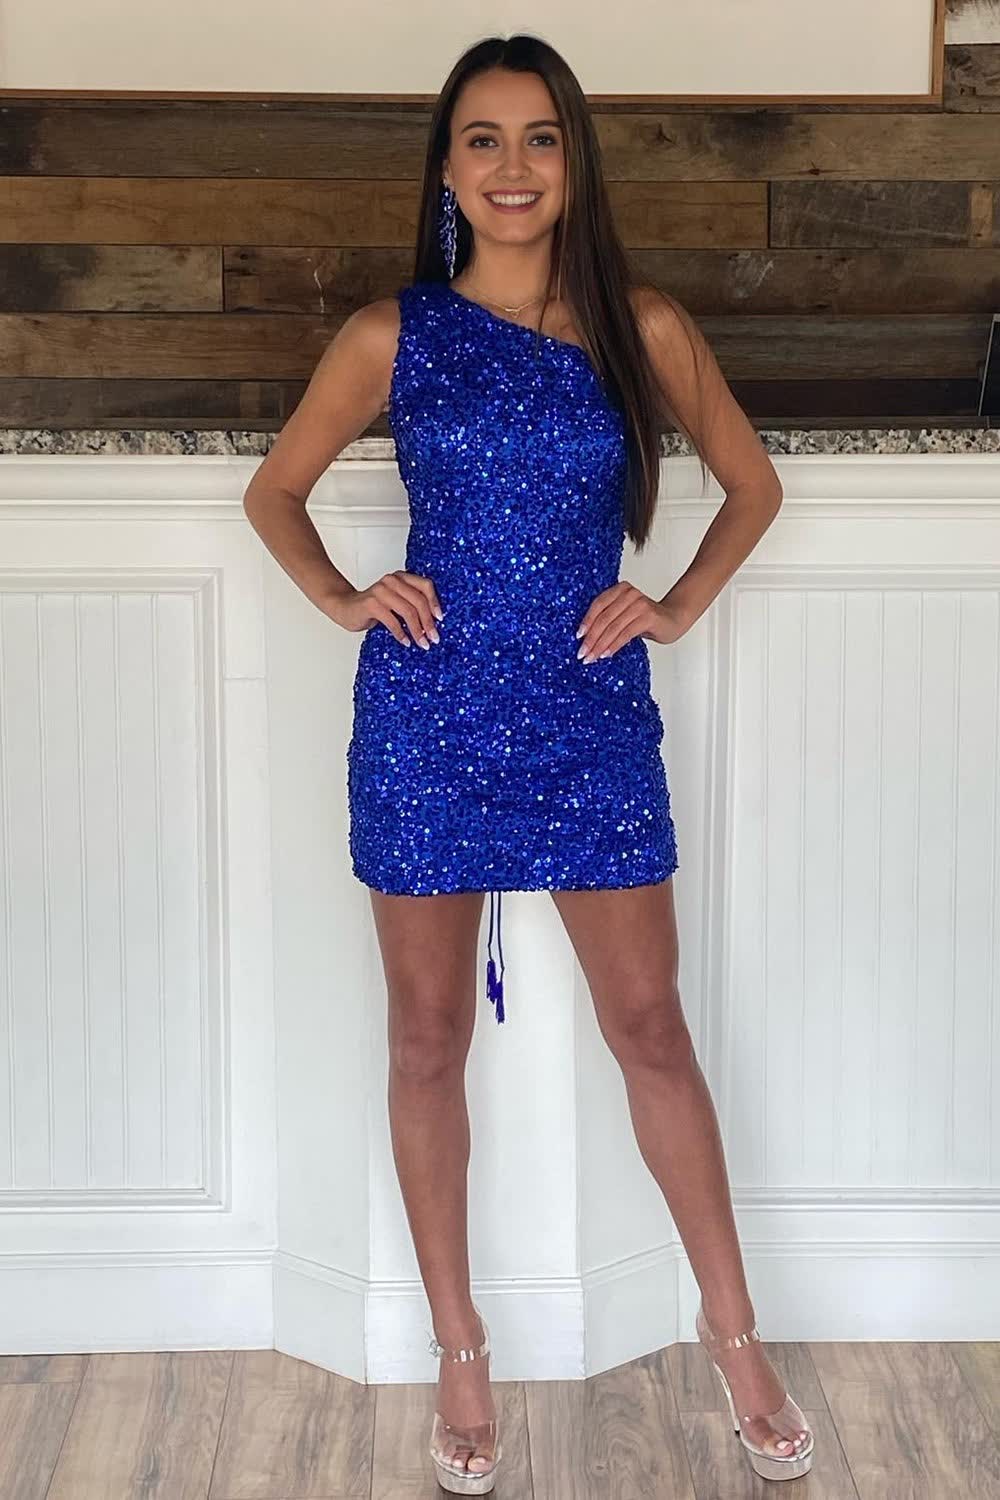 Sheath One Shoulder Royal Blue Sequins Short Corset Homecoming Dress outfit, Sheath One Shoulder Royal Blue Sequins Short Homecoming Dress